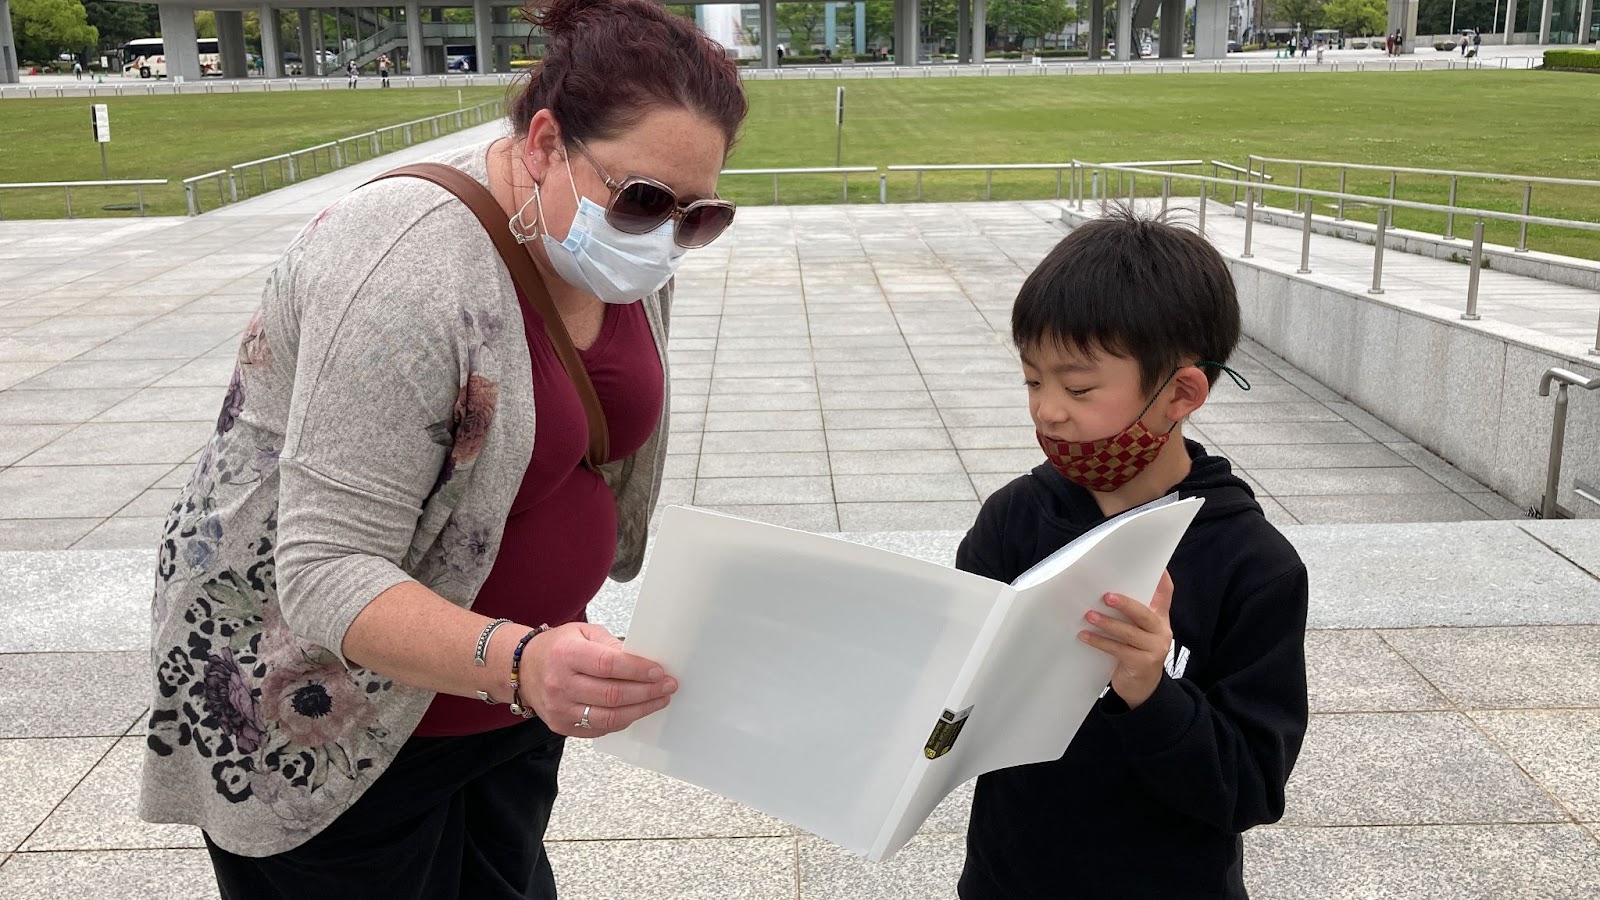 A Novakid student serves as an English-speaking guide in Hiroshima